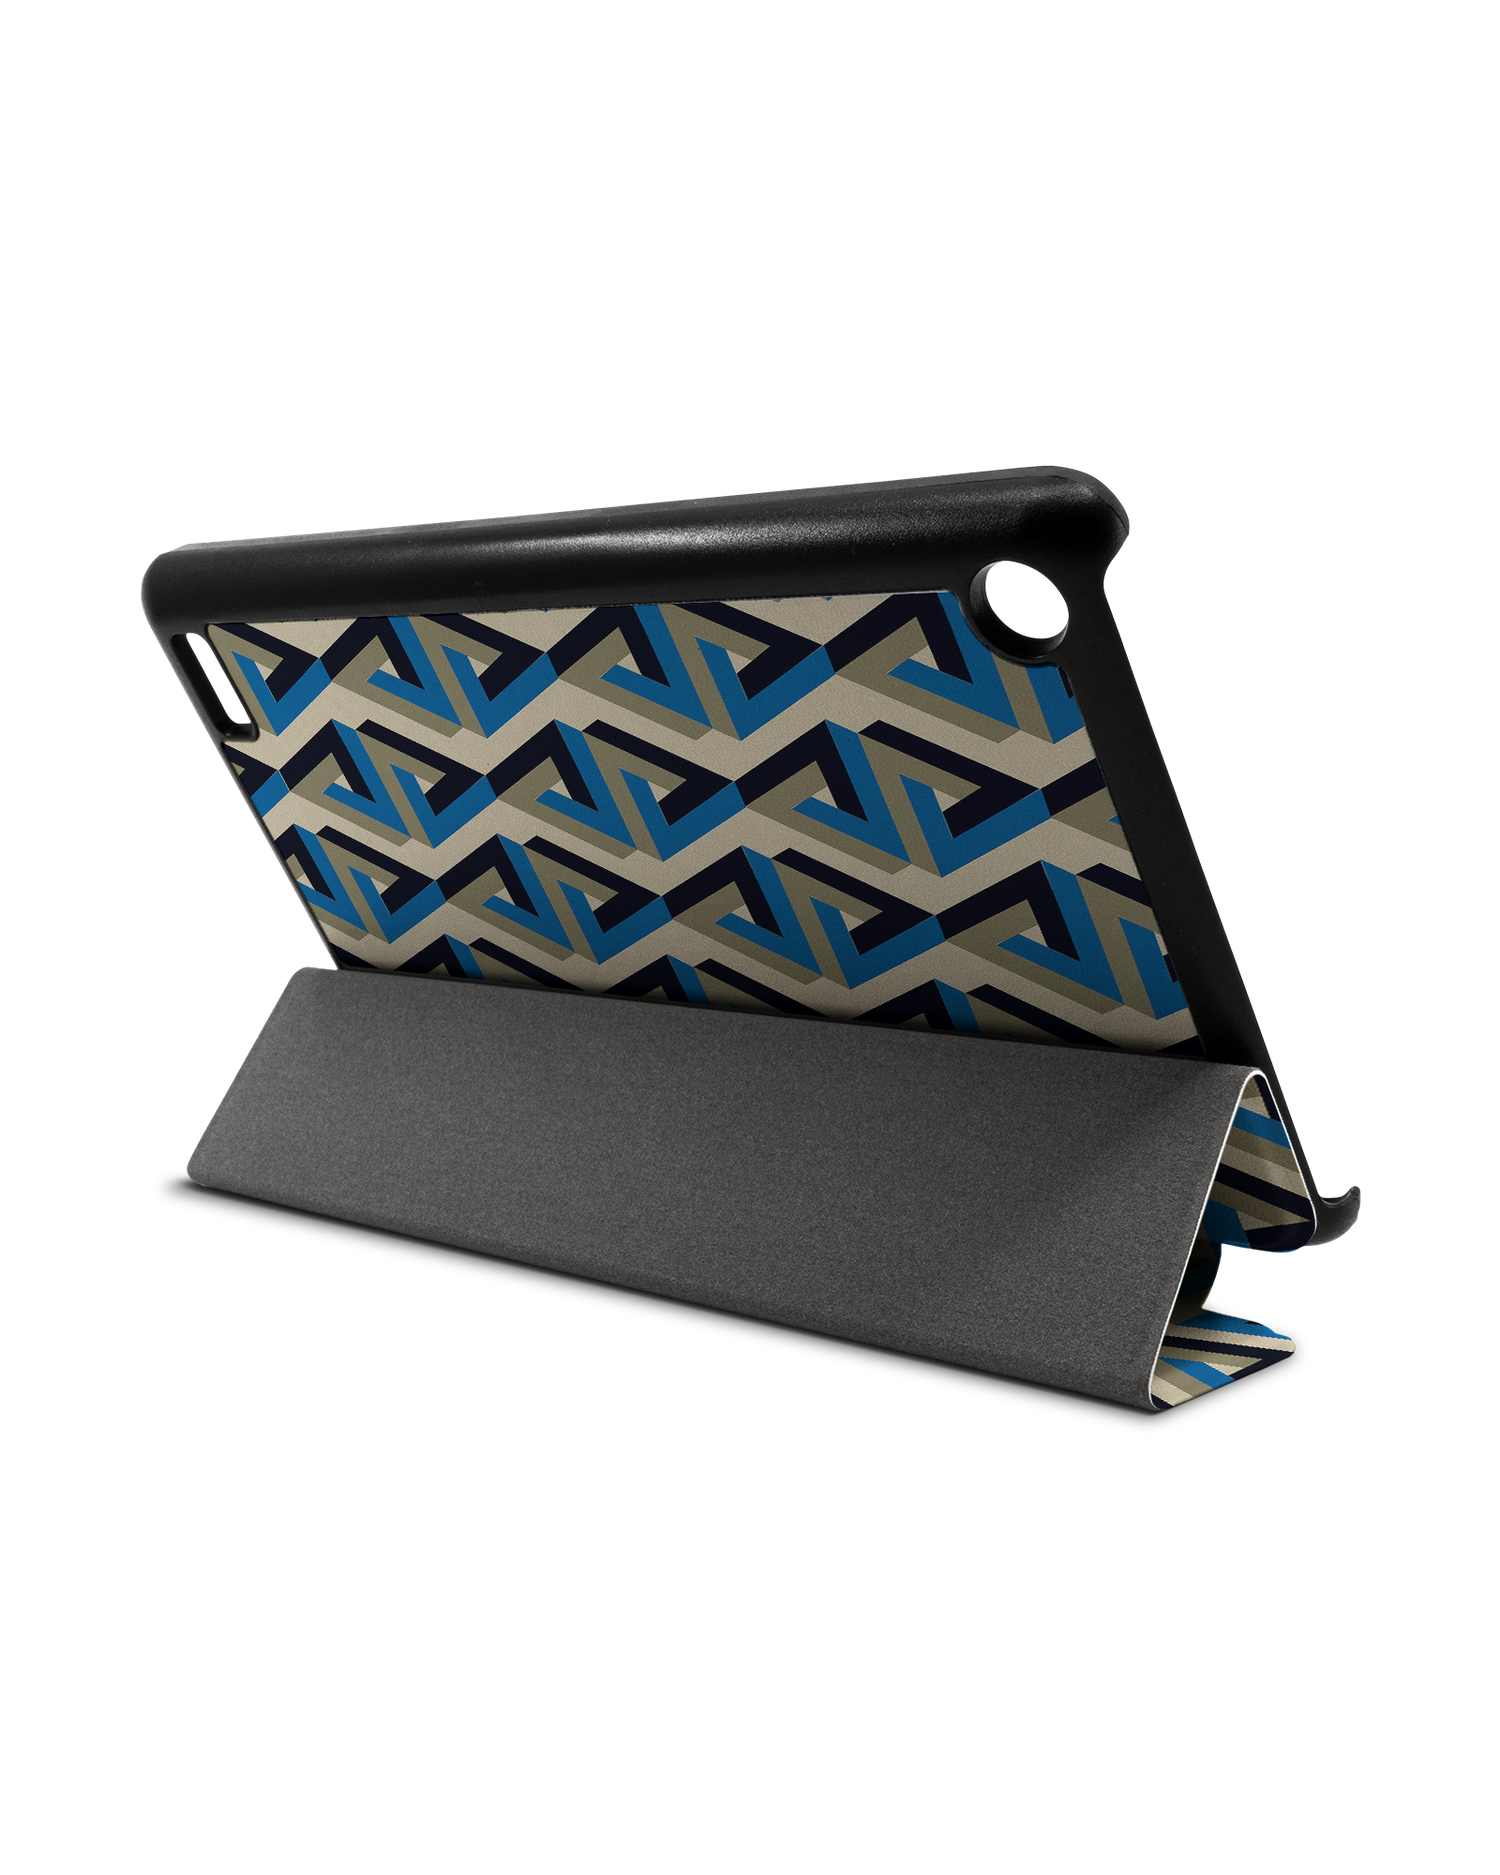 Penrose Pattern Tablet Smart Case for Amazon Fire 7: Used as Stand